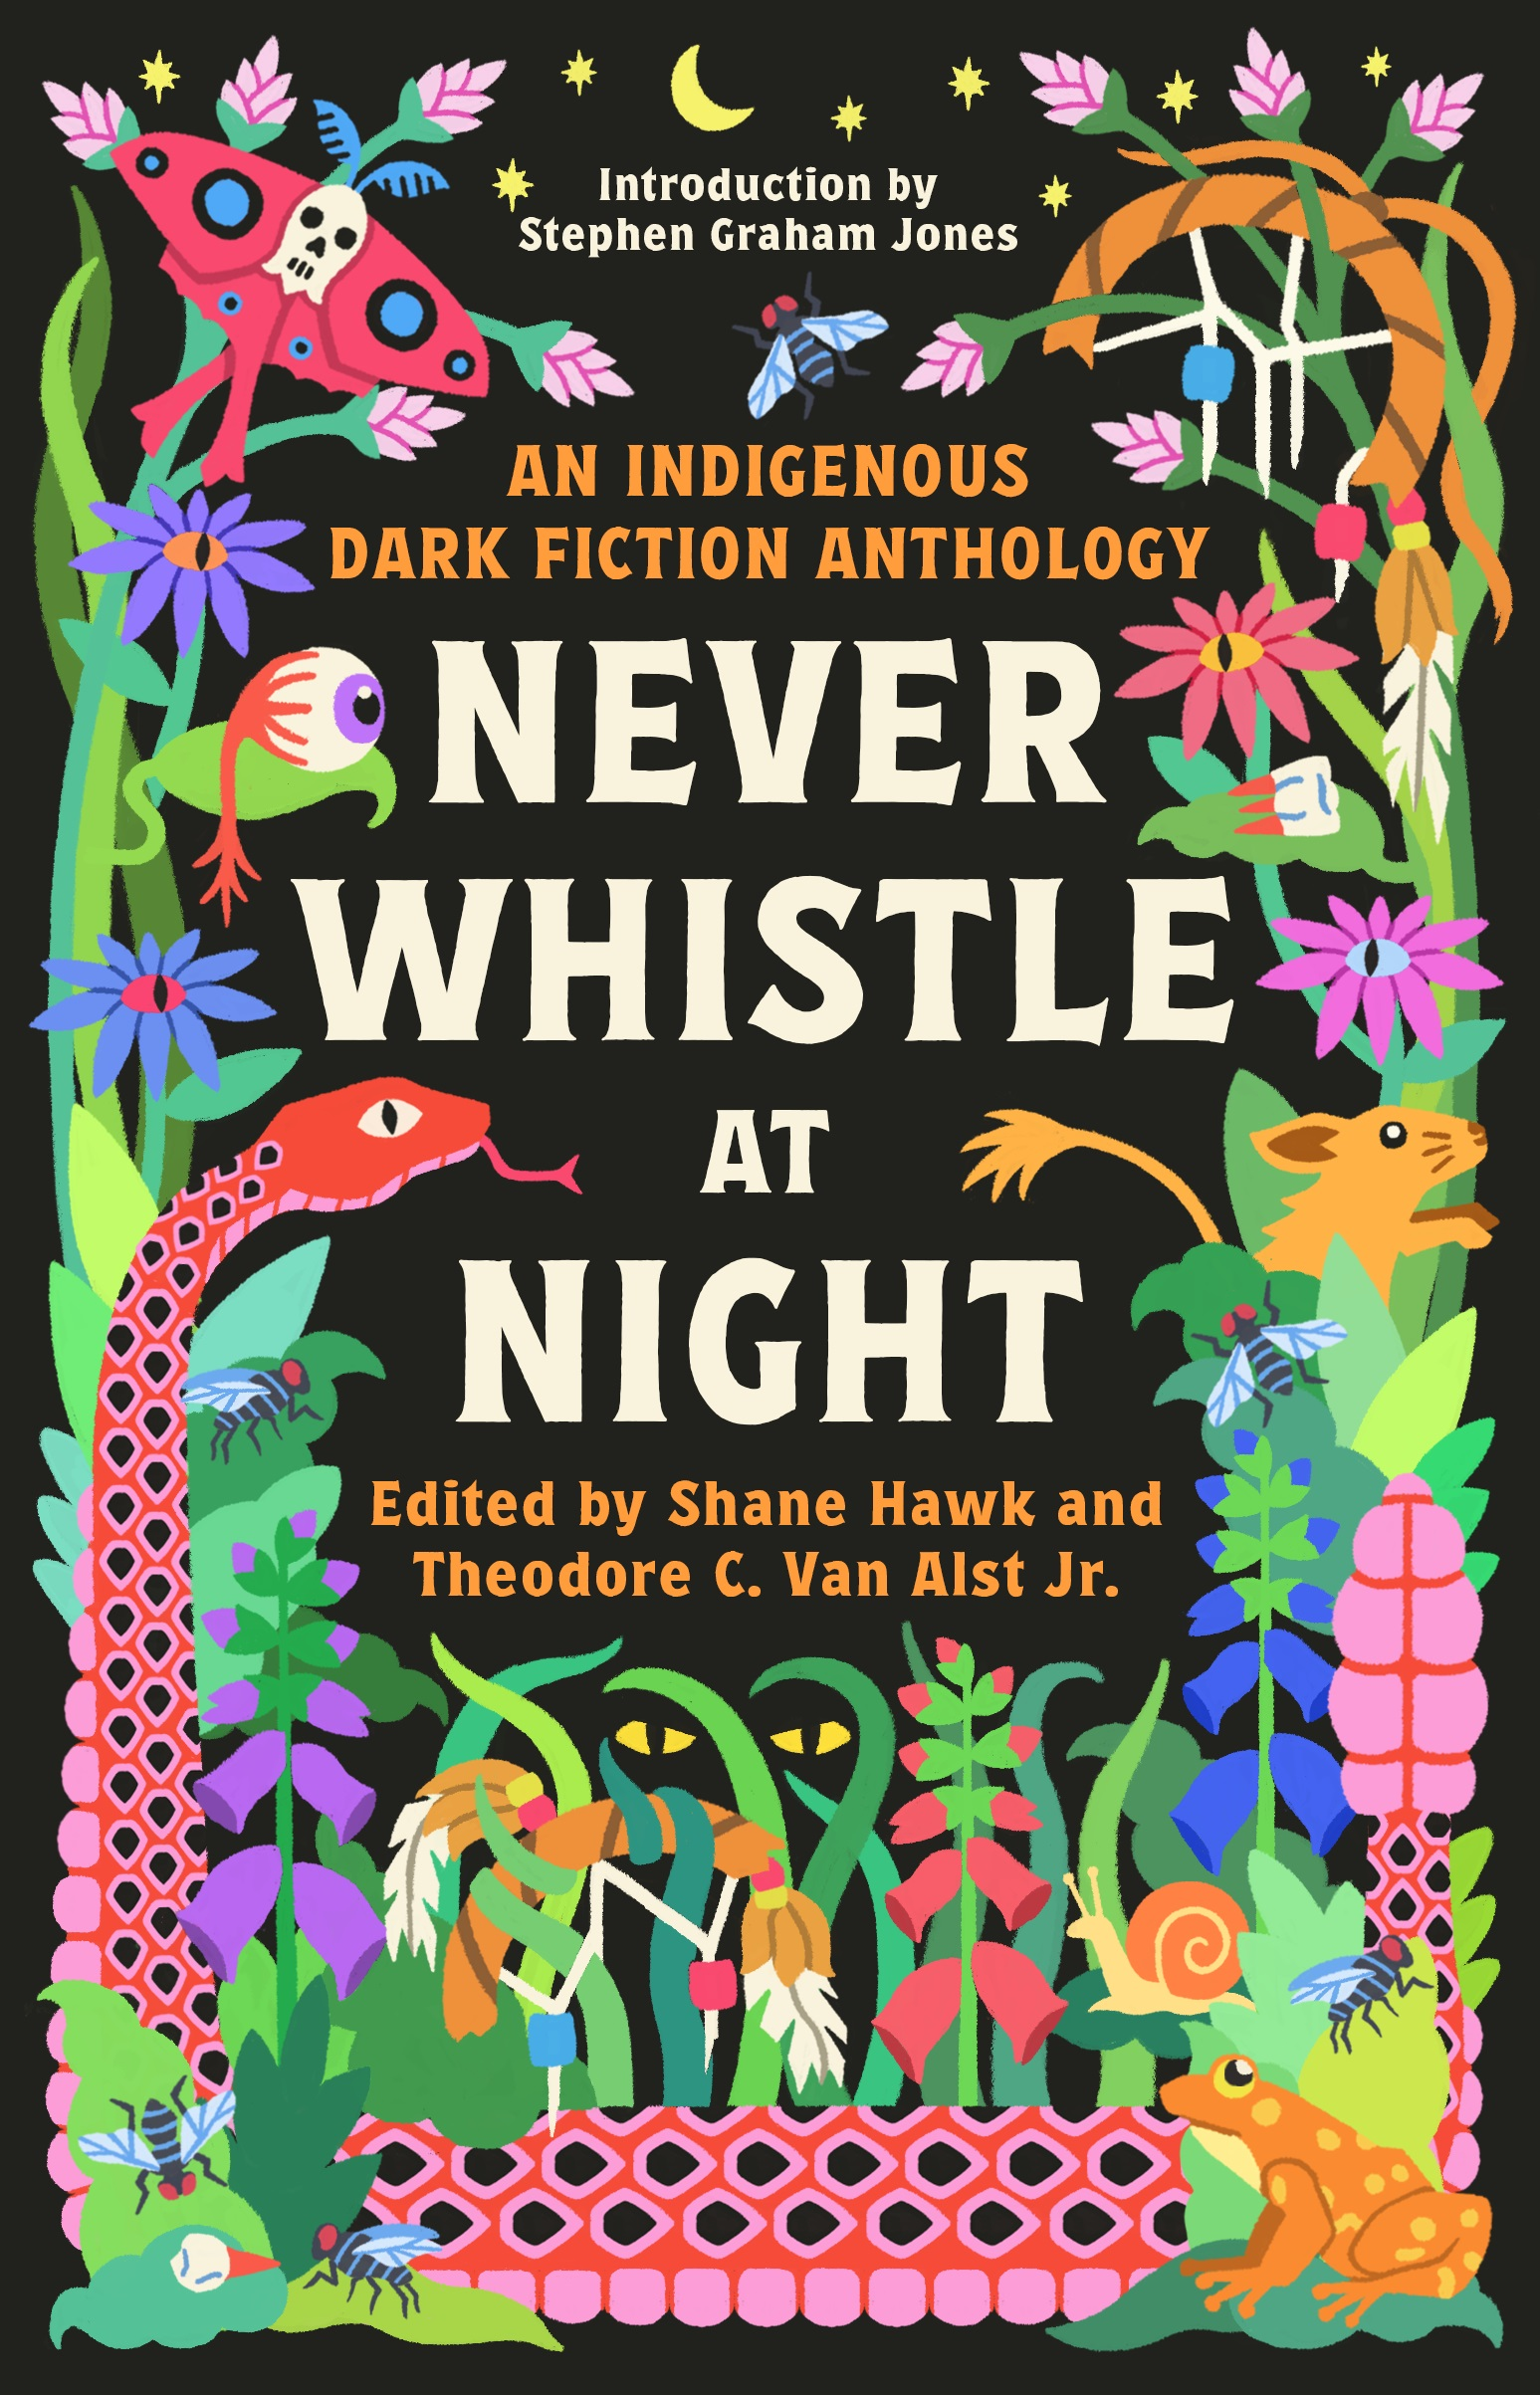 'Never Whistle at Night' spotlights dark fiction by Indigenous authors